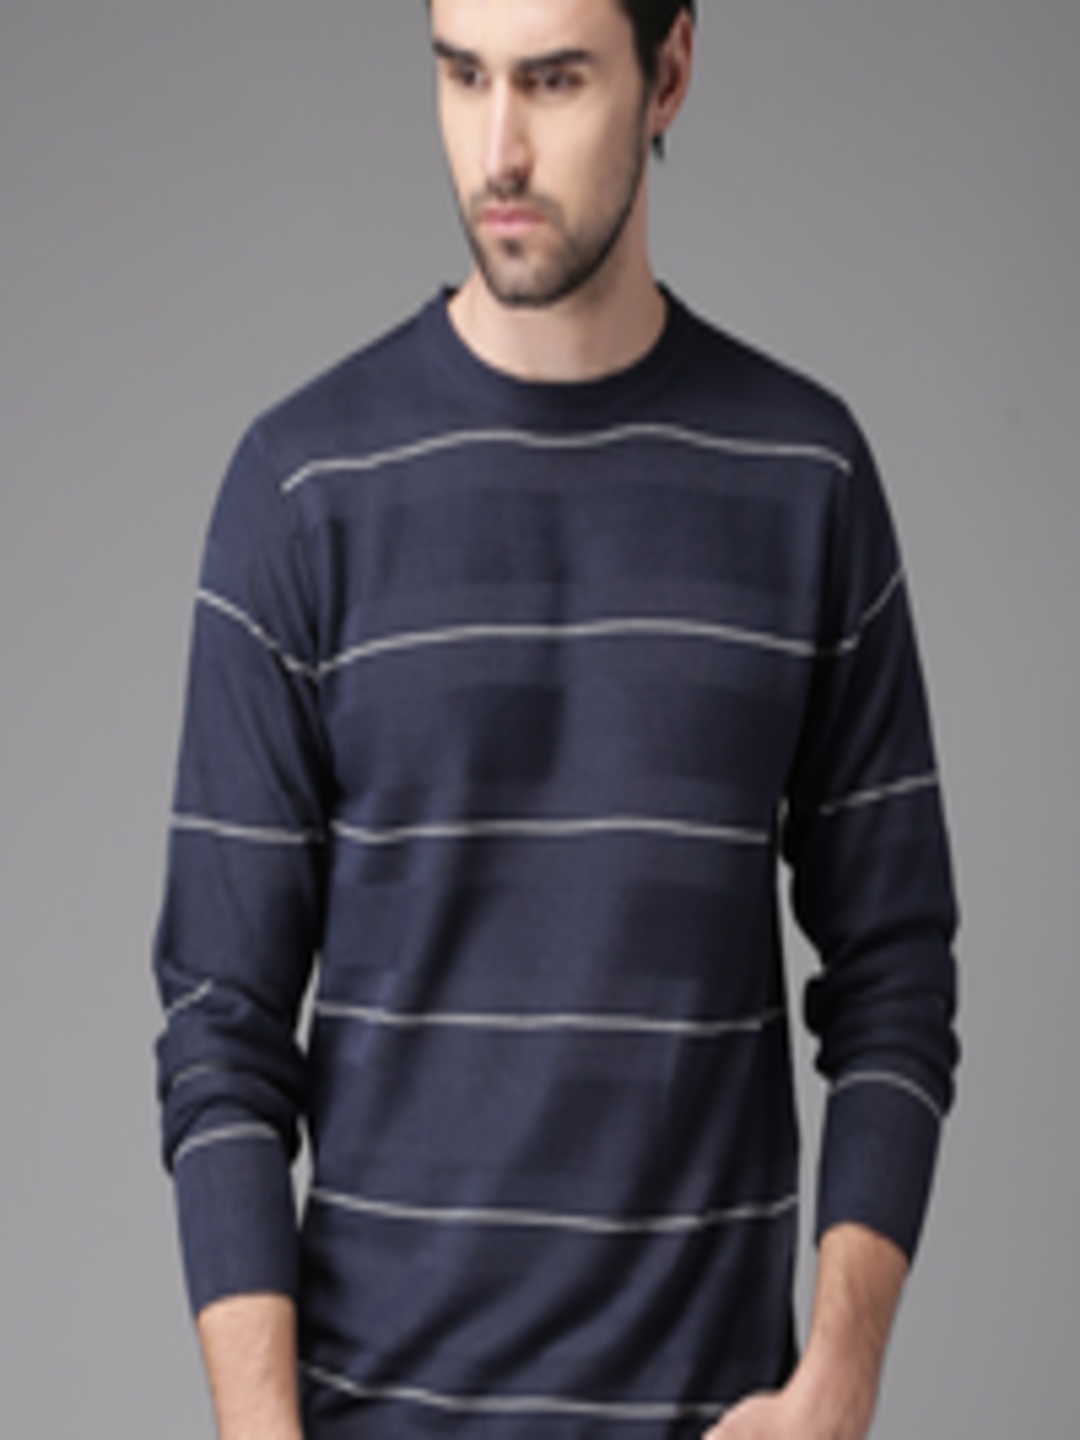 Buy HERE&NOW Men Navy Blue Striped Pullover Sweater - Sweaters for Men ...